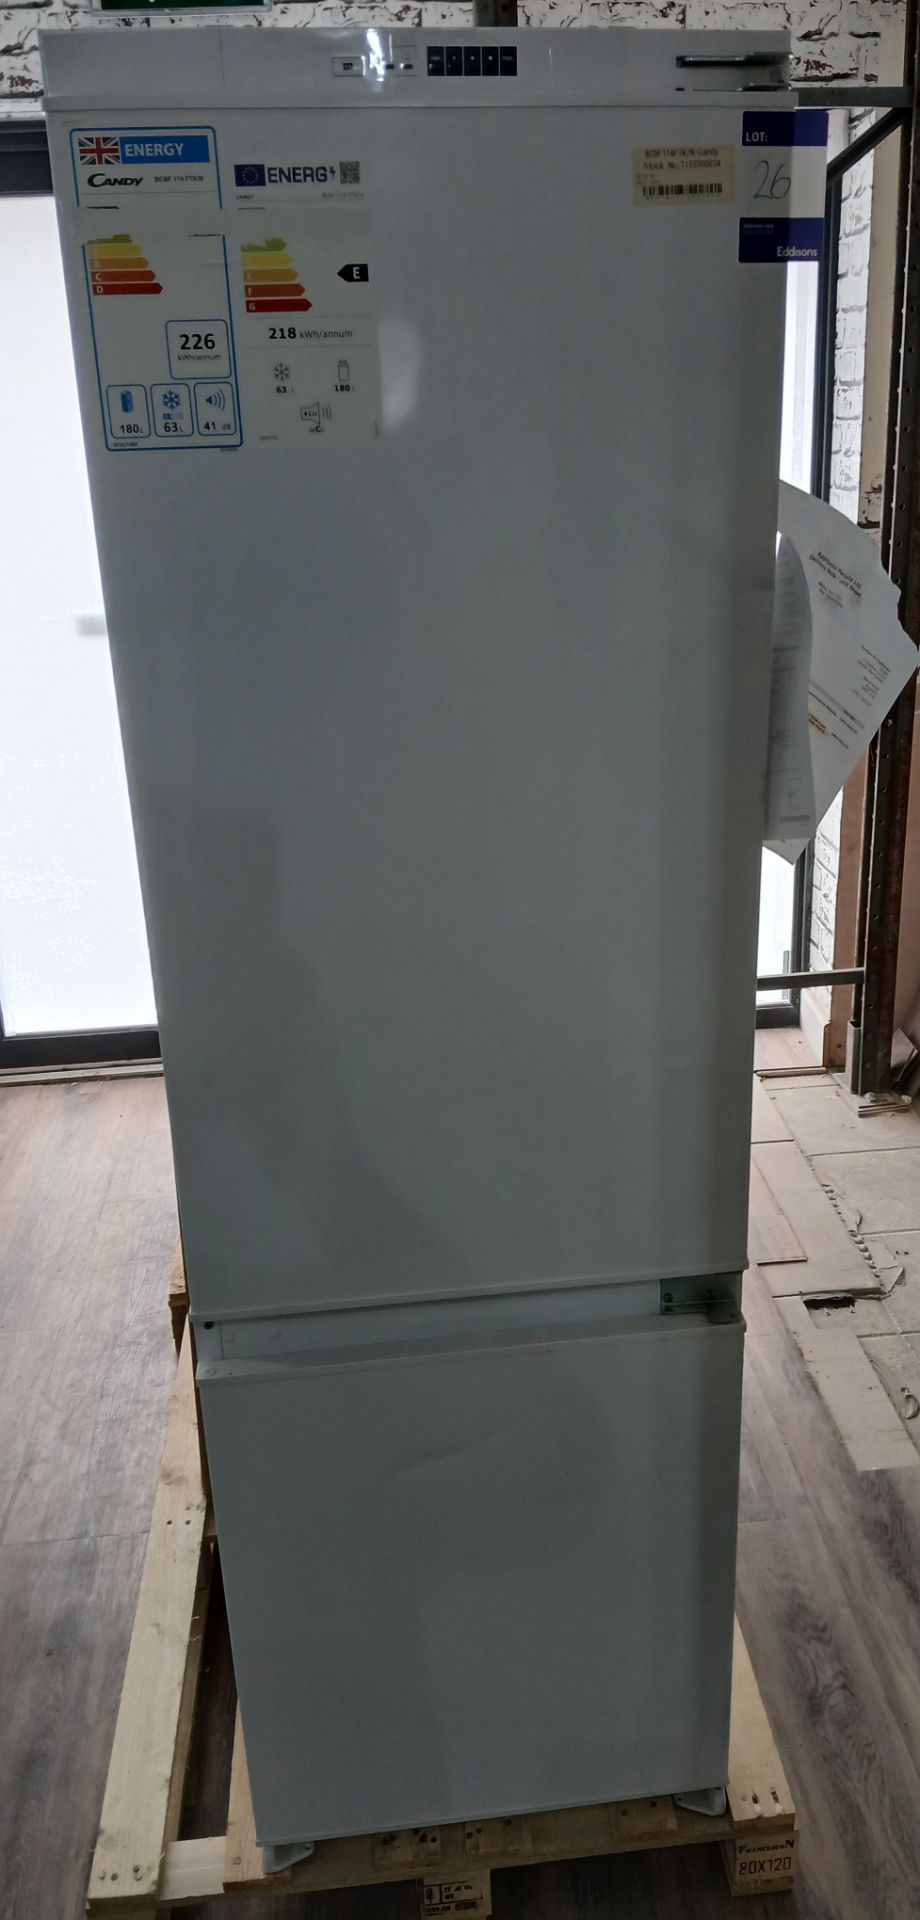 Candy BCBF 174 FTK/N Integrated Fridge Freezer (Please note, Viewing Strongly Recommended - Eddisons